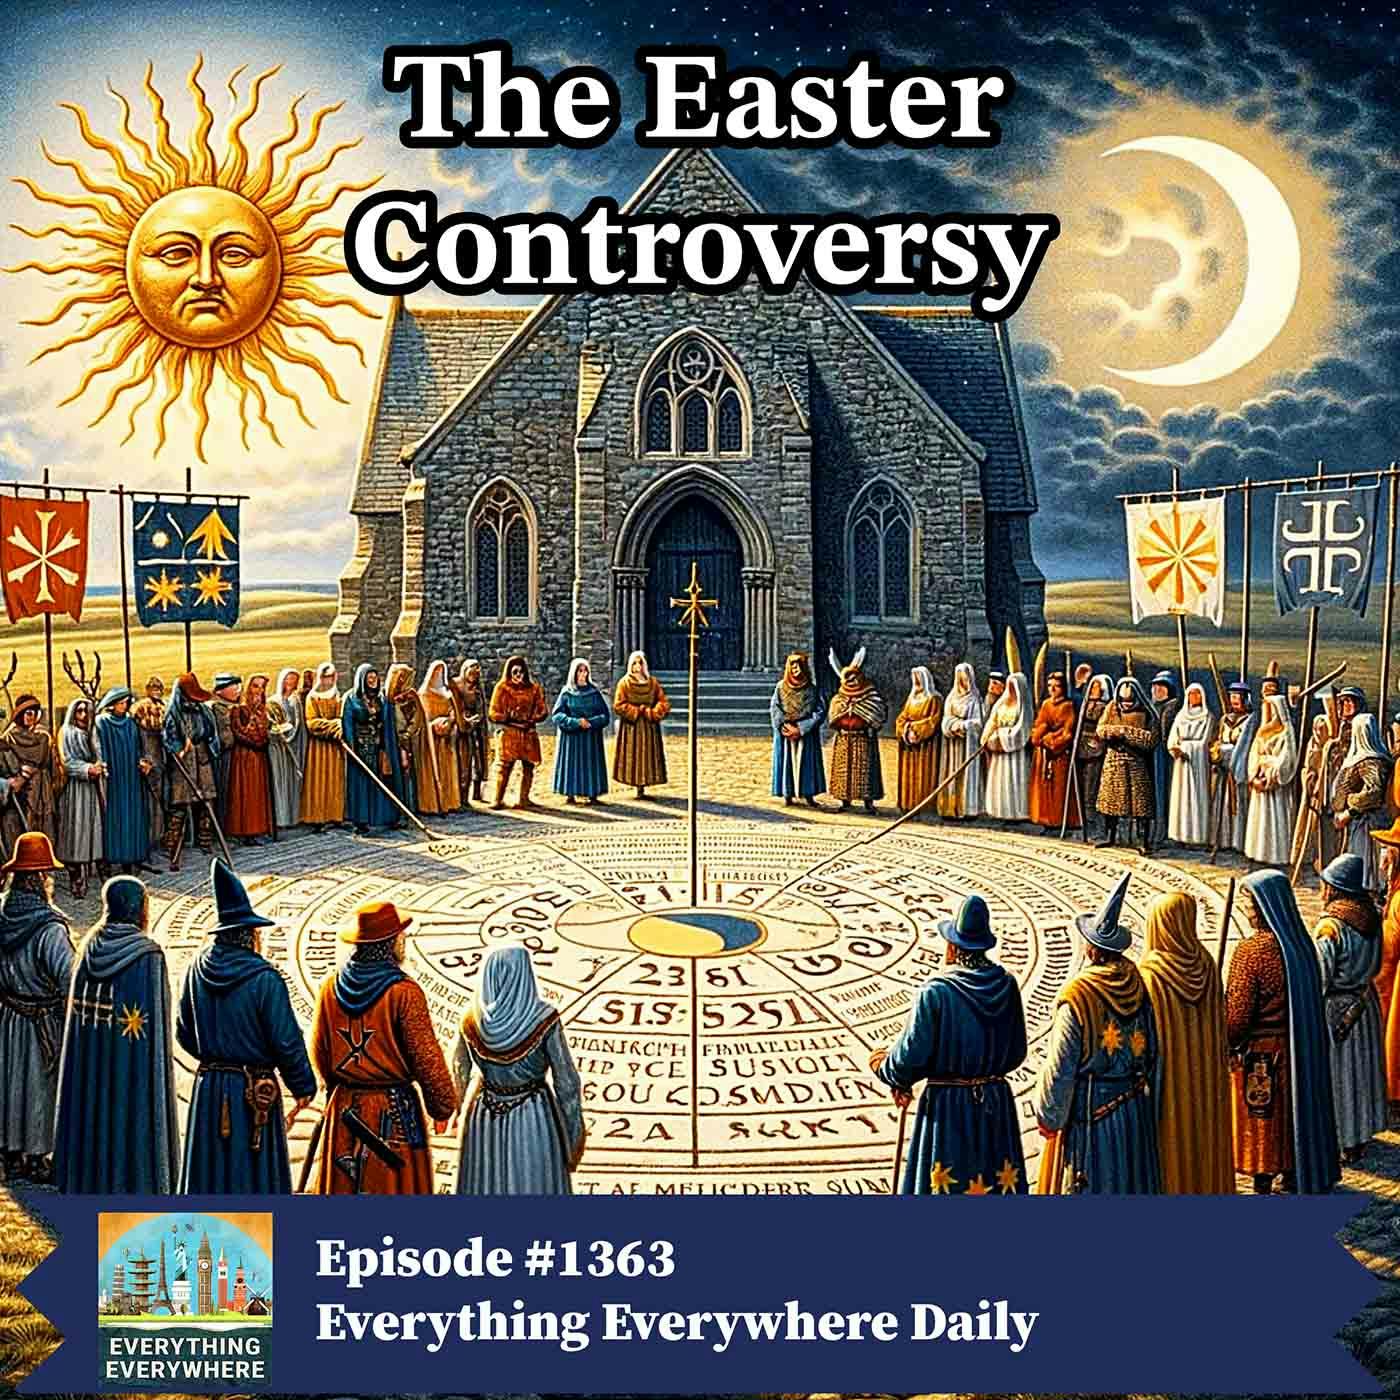 The Easter Controversy